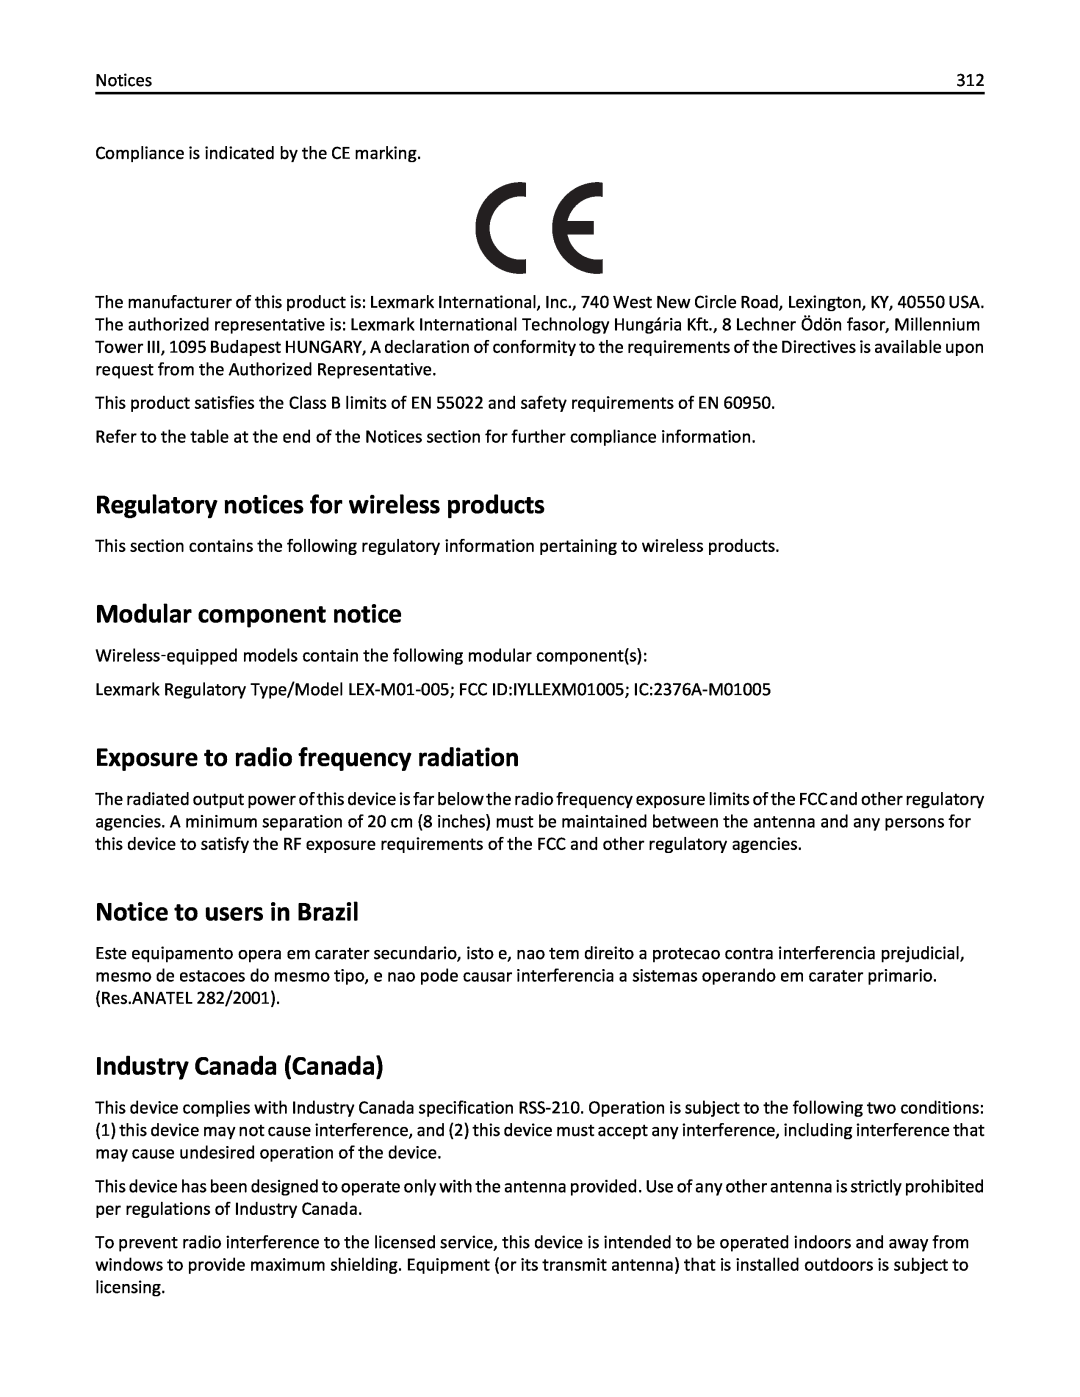 Lexmark MX510 Regulatory notices for wireless products, Modular component notice, Exposure to radio frequency radiation 